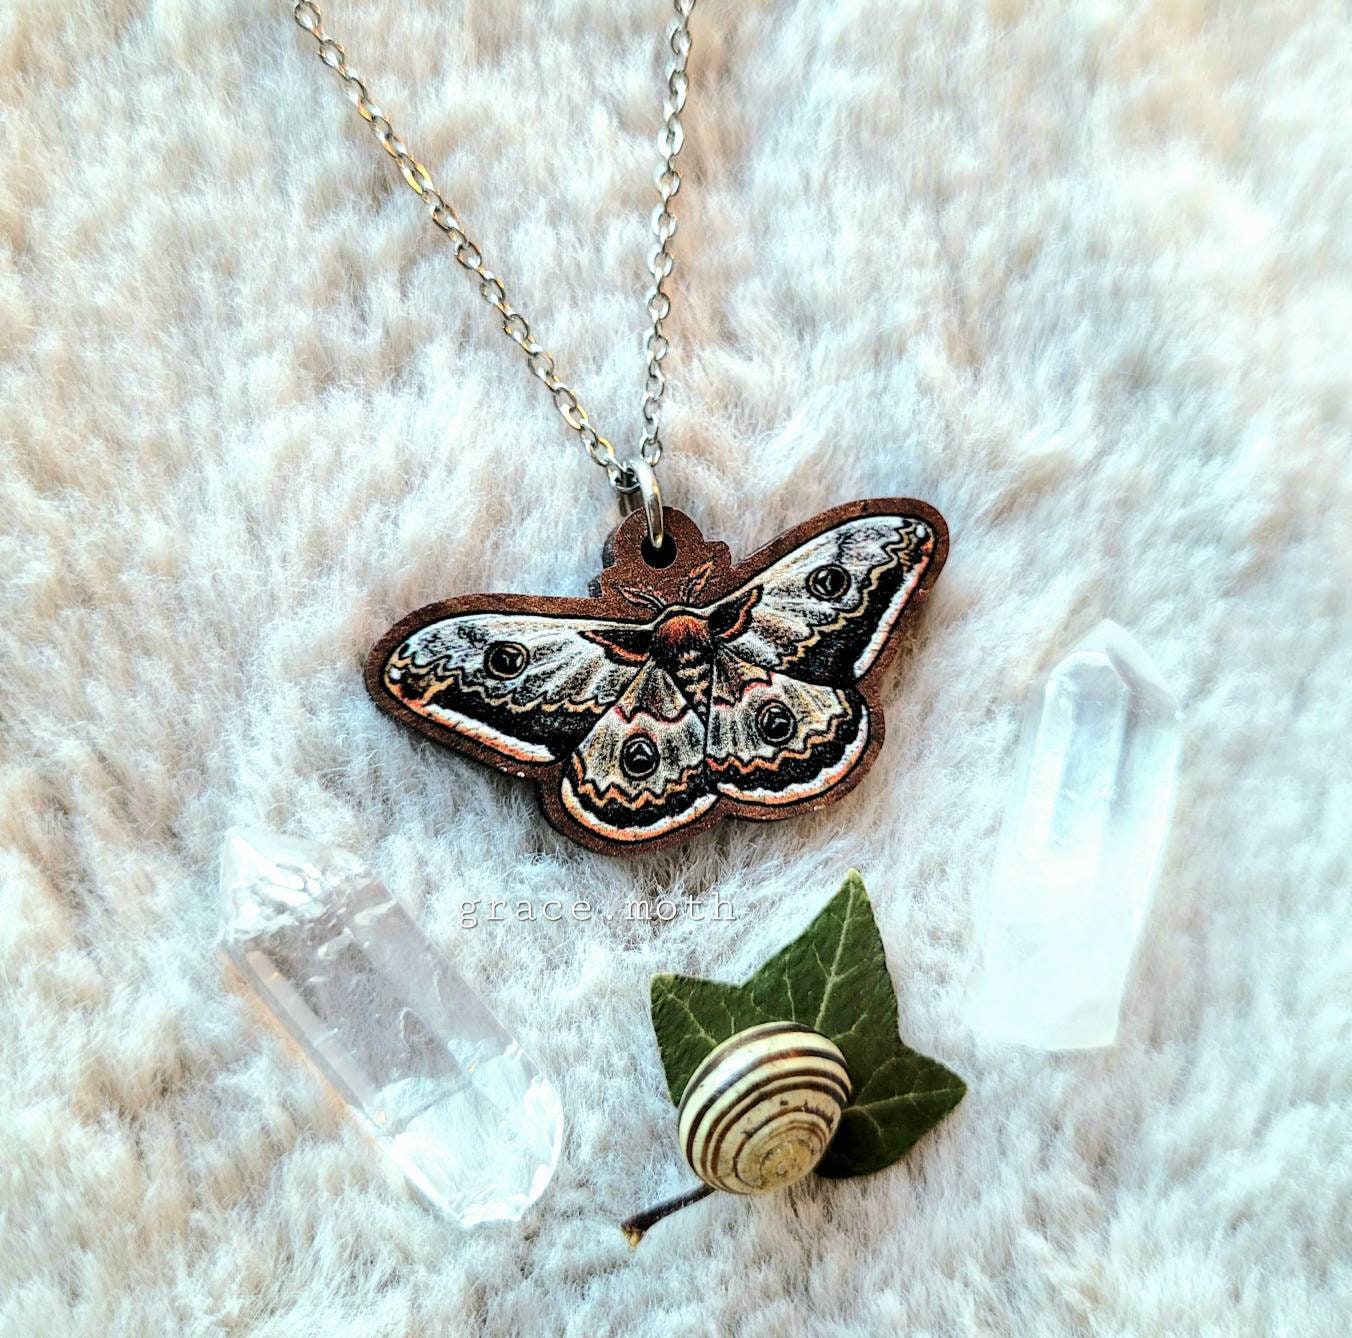 Emperor Moth illustrated necklace, responsibly sourced cherry wood, chain options available, by Grace Moth